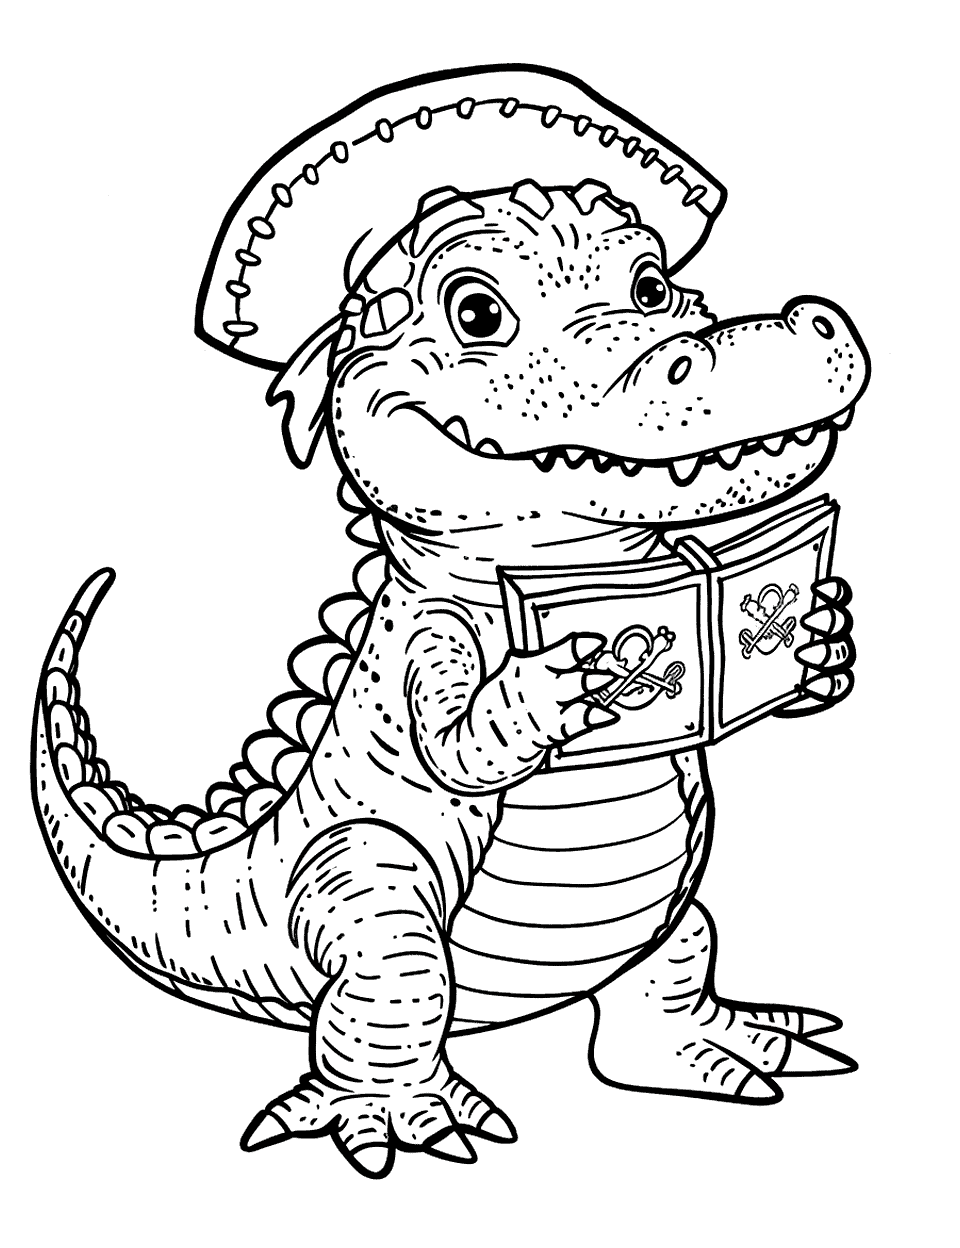 Alligator in a Halloween Costume Coloring Page - An alligator dressed as a pirate for Halloween, holding a treasure map.